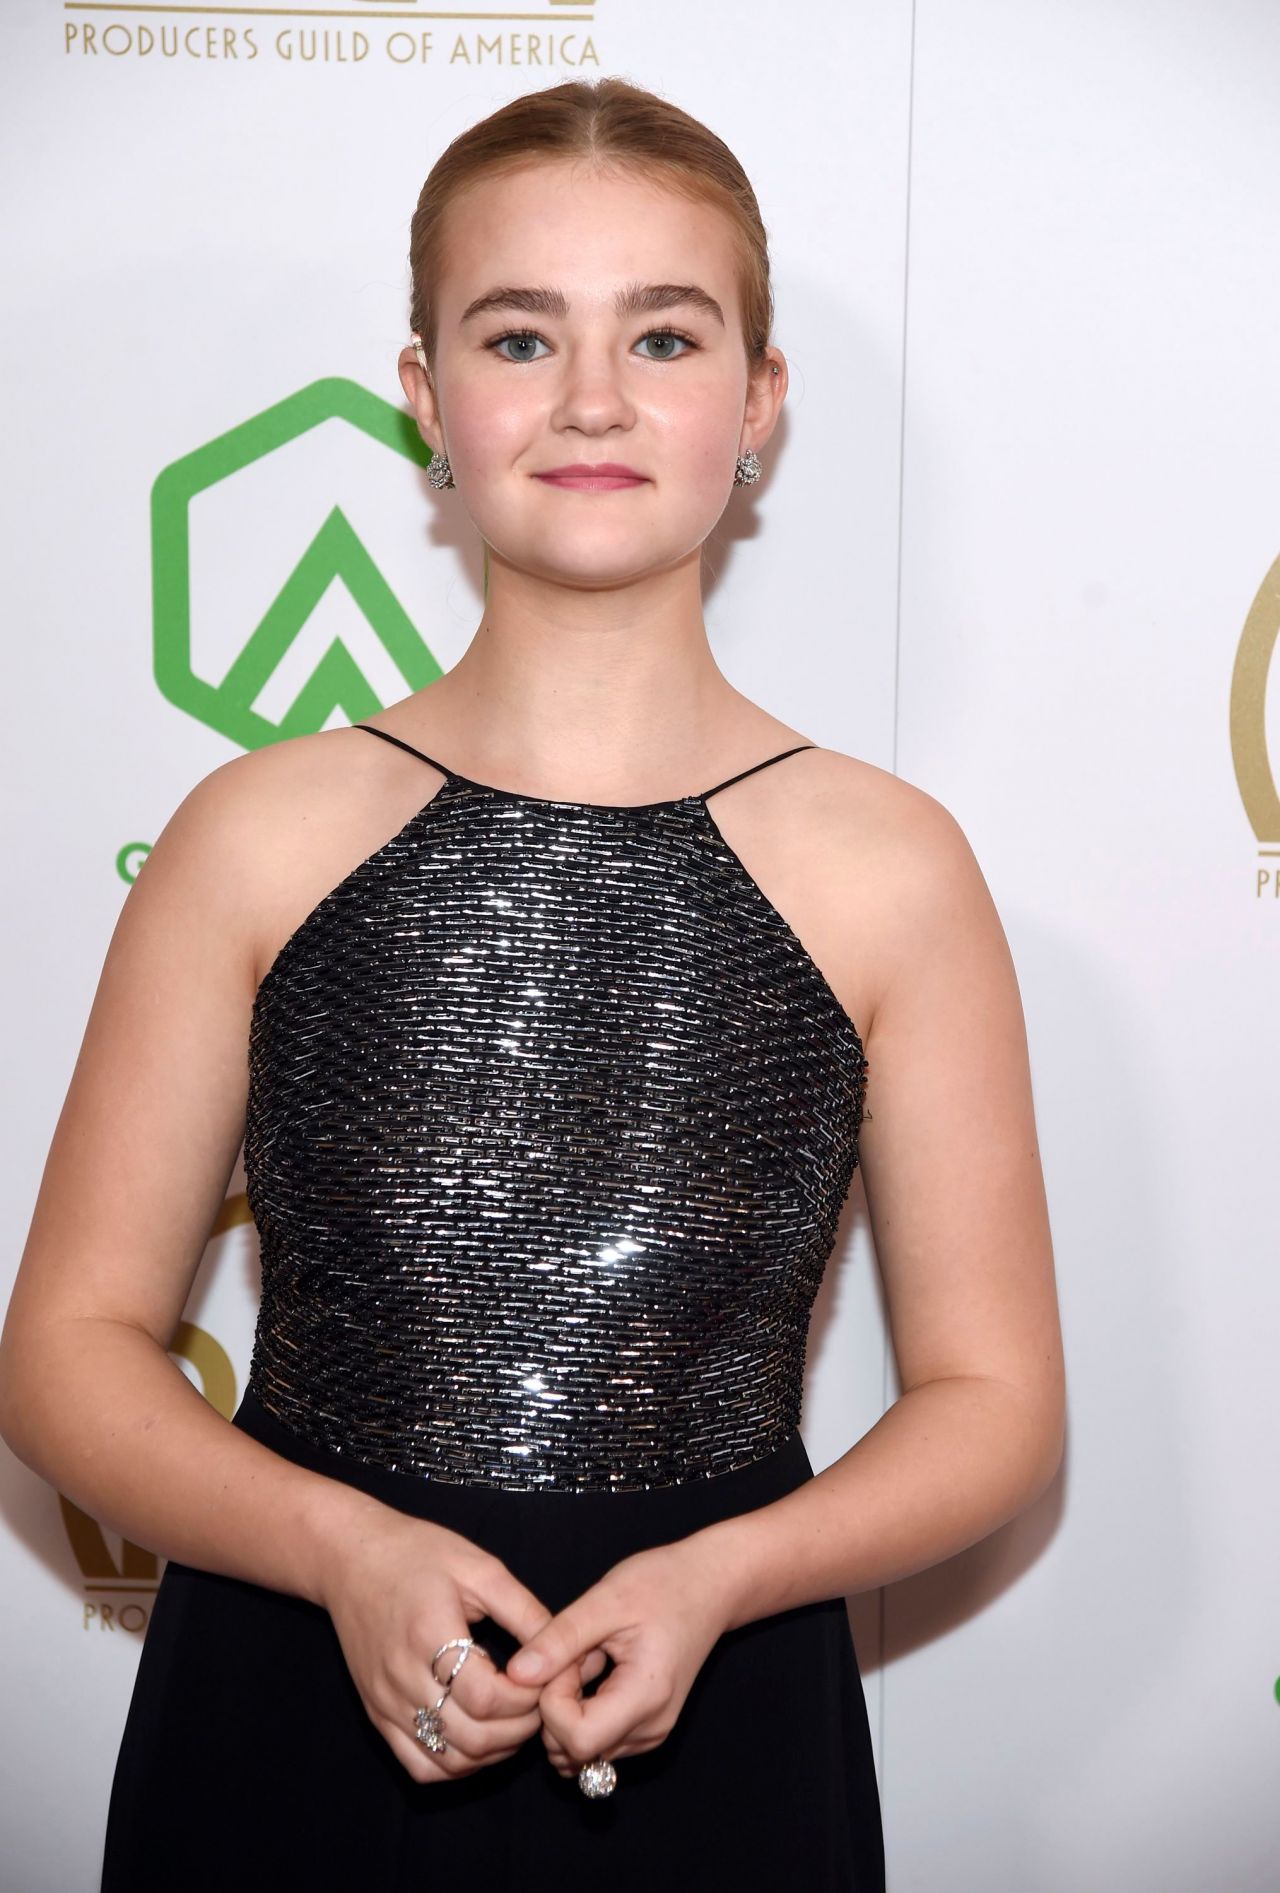 Millicent simmonds was born in the united states of america in the state of...